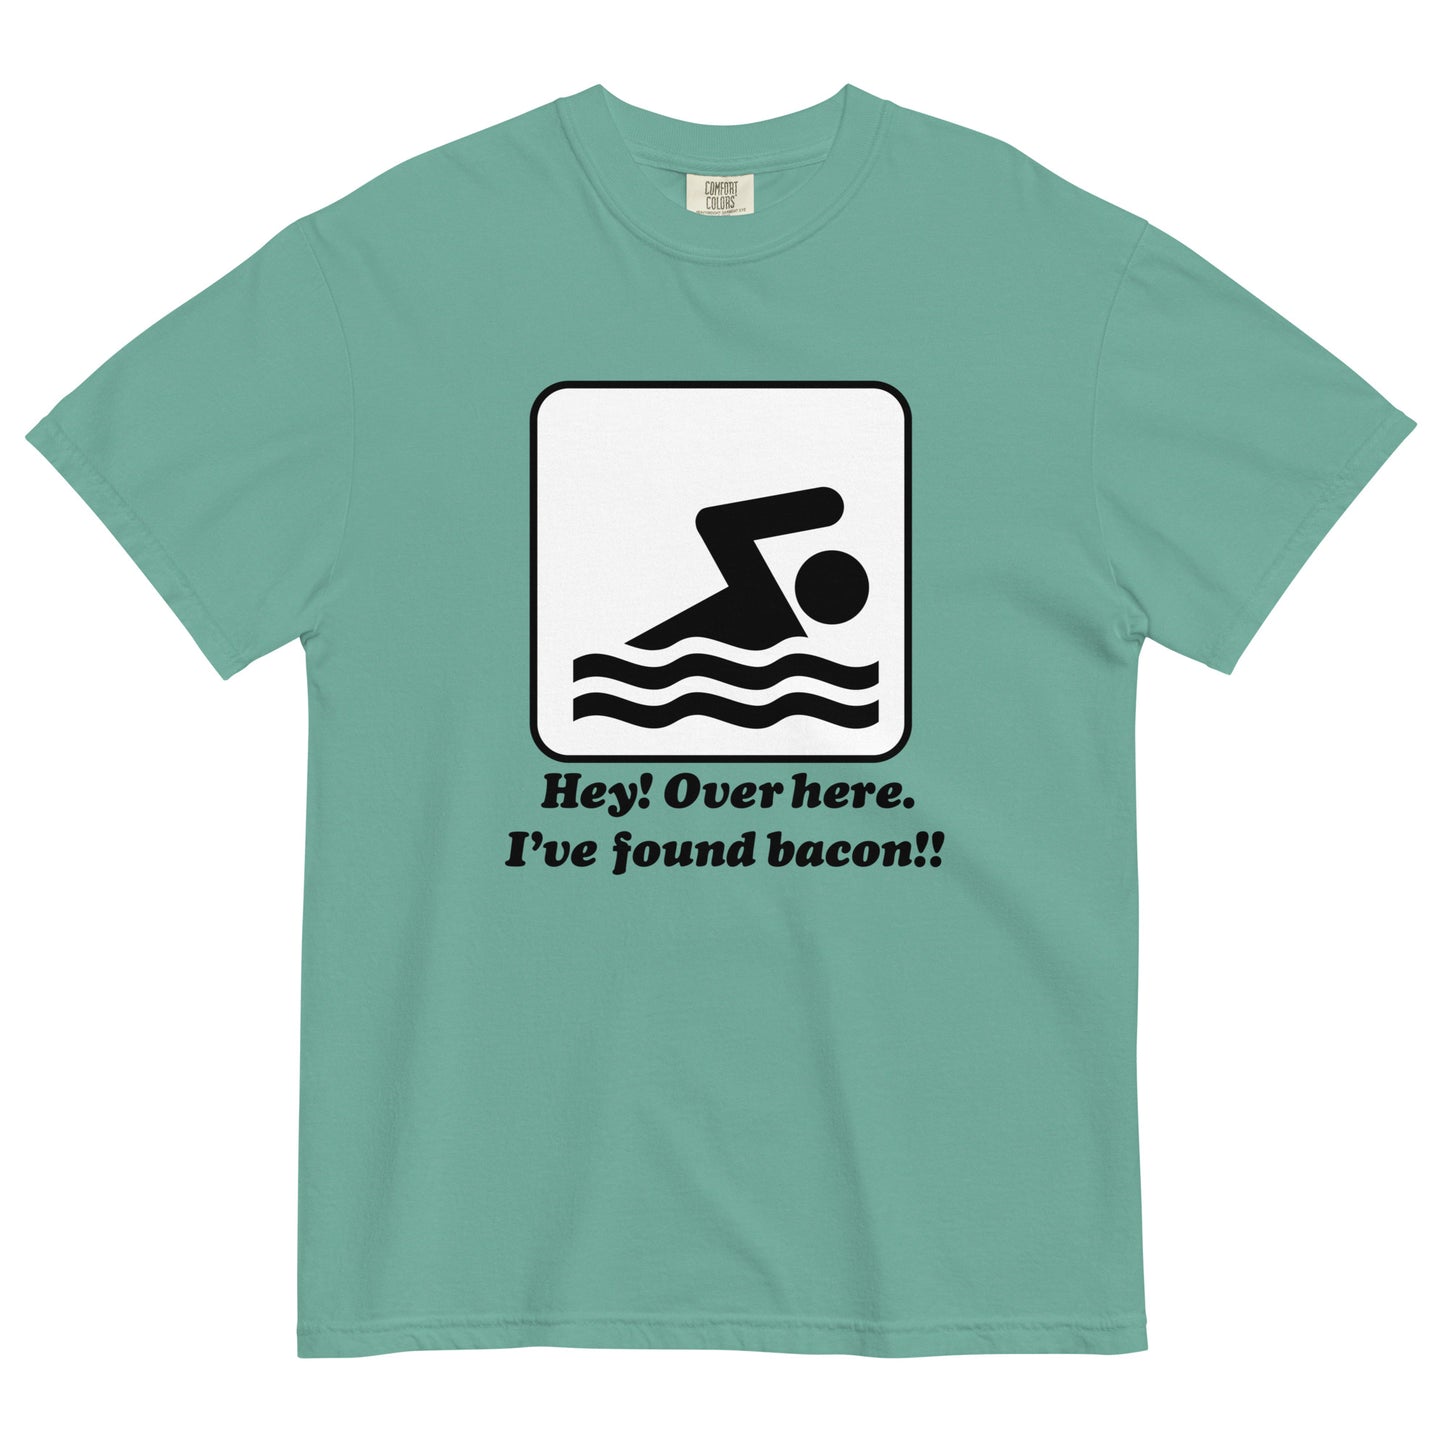 I've Found Bacon! Men's Relaxed Fit Tee